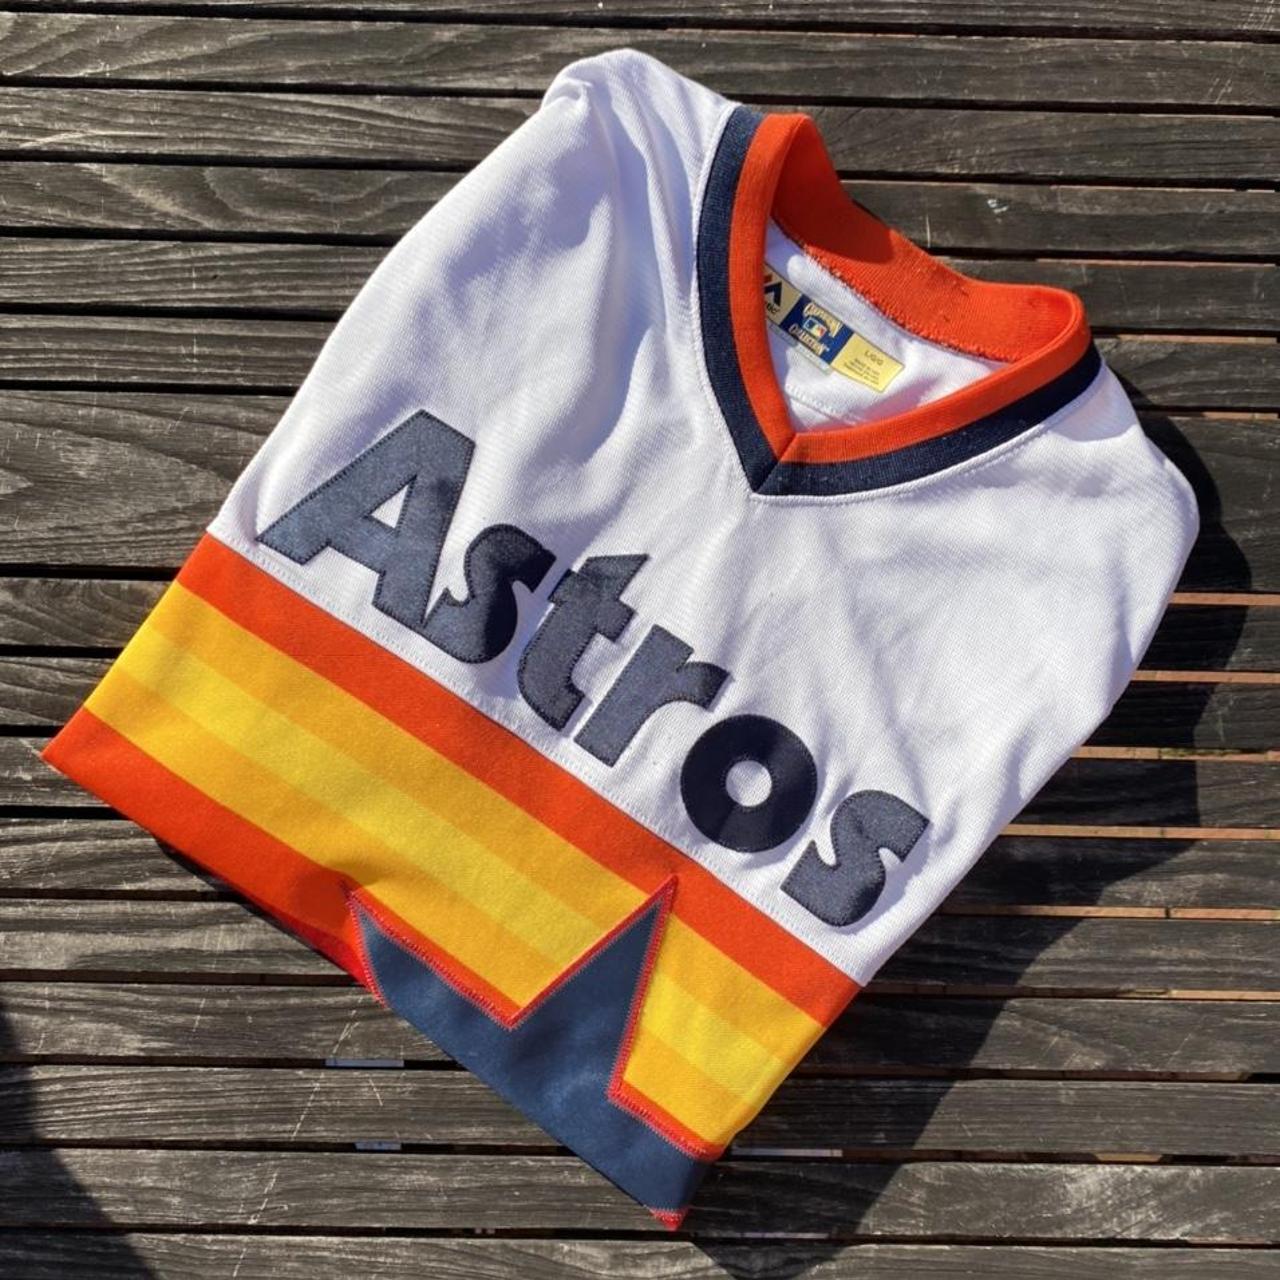 Majestic™️ Astros Jersey, Cooperstown collection - Depop